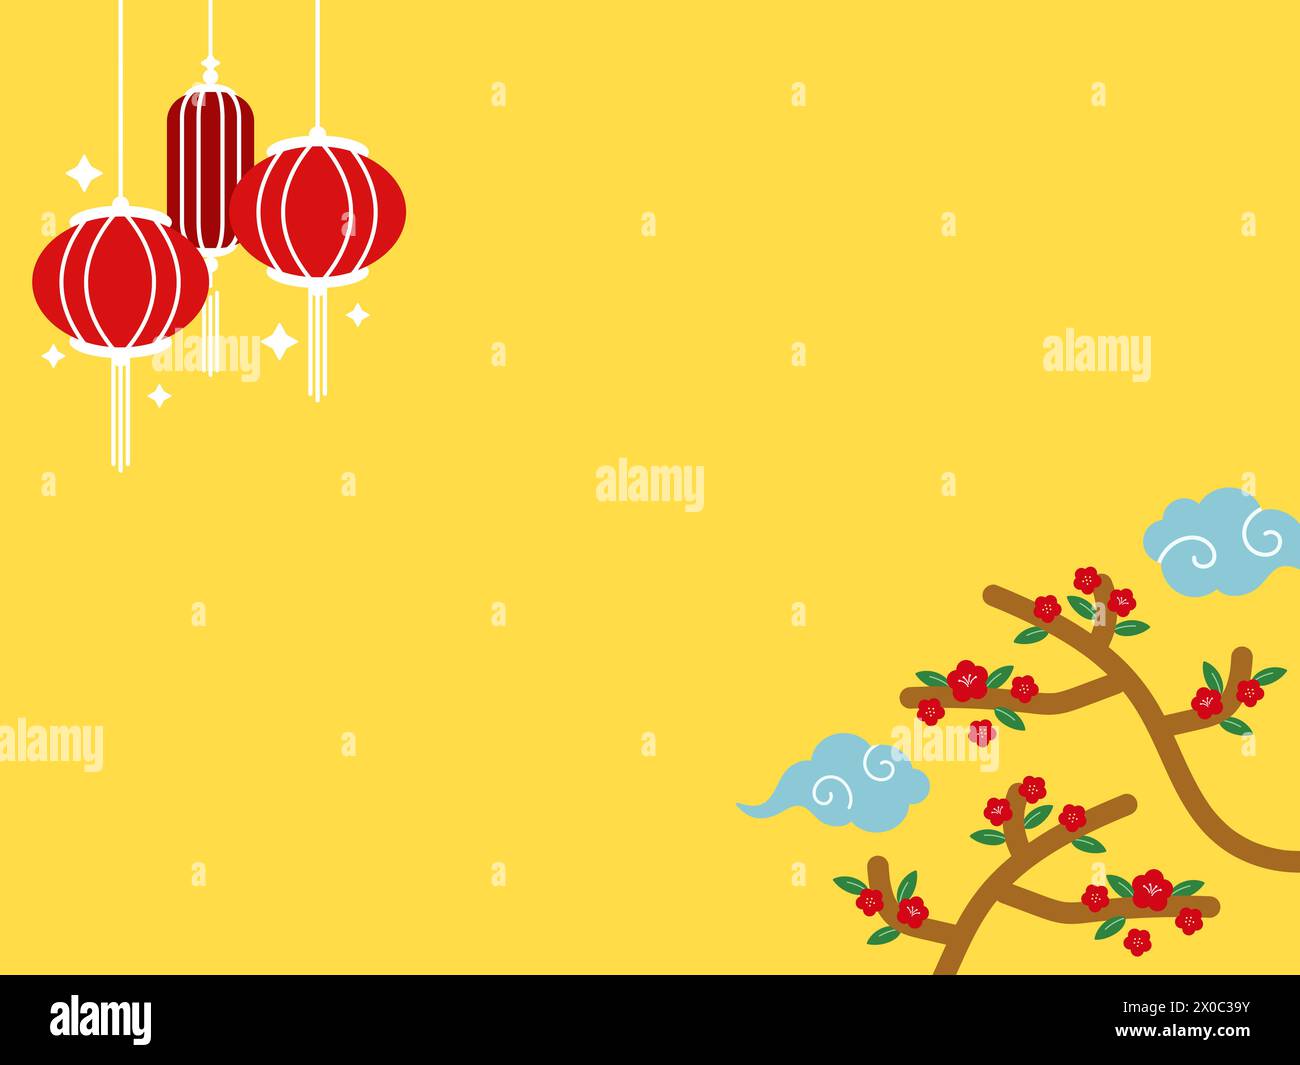 Yellow background with red lanterns, clouds, tree roots for Chinese New Year, Chuseok, mid autumn festival, celebration, wallpaper, banner, frame, ads Stock Vector